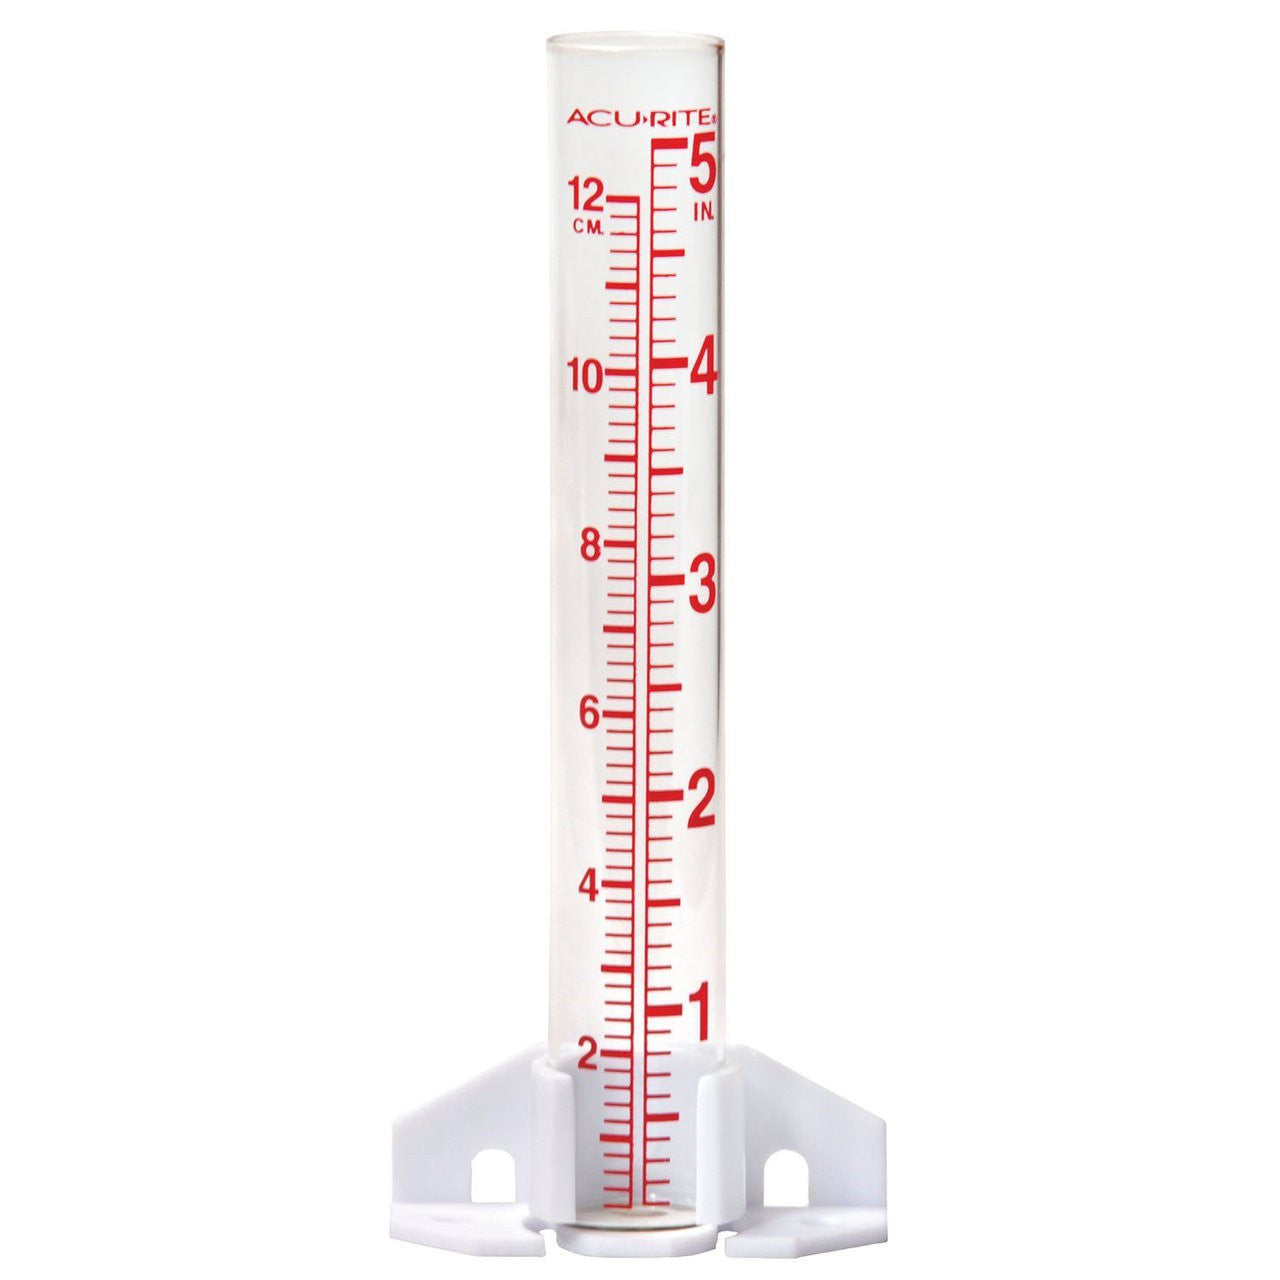 AcuRite Glass Rain Gauge - Measure the Rain Fall or Monitor your Lawn and Garden